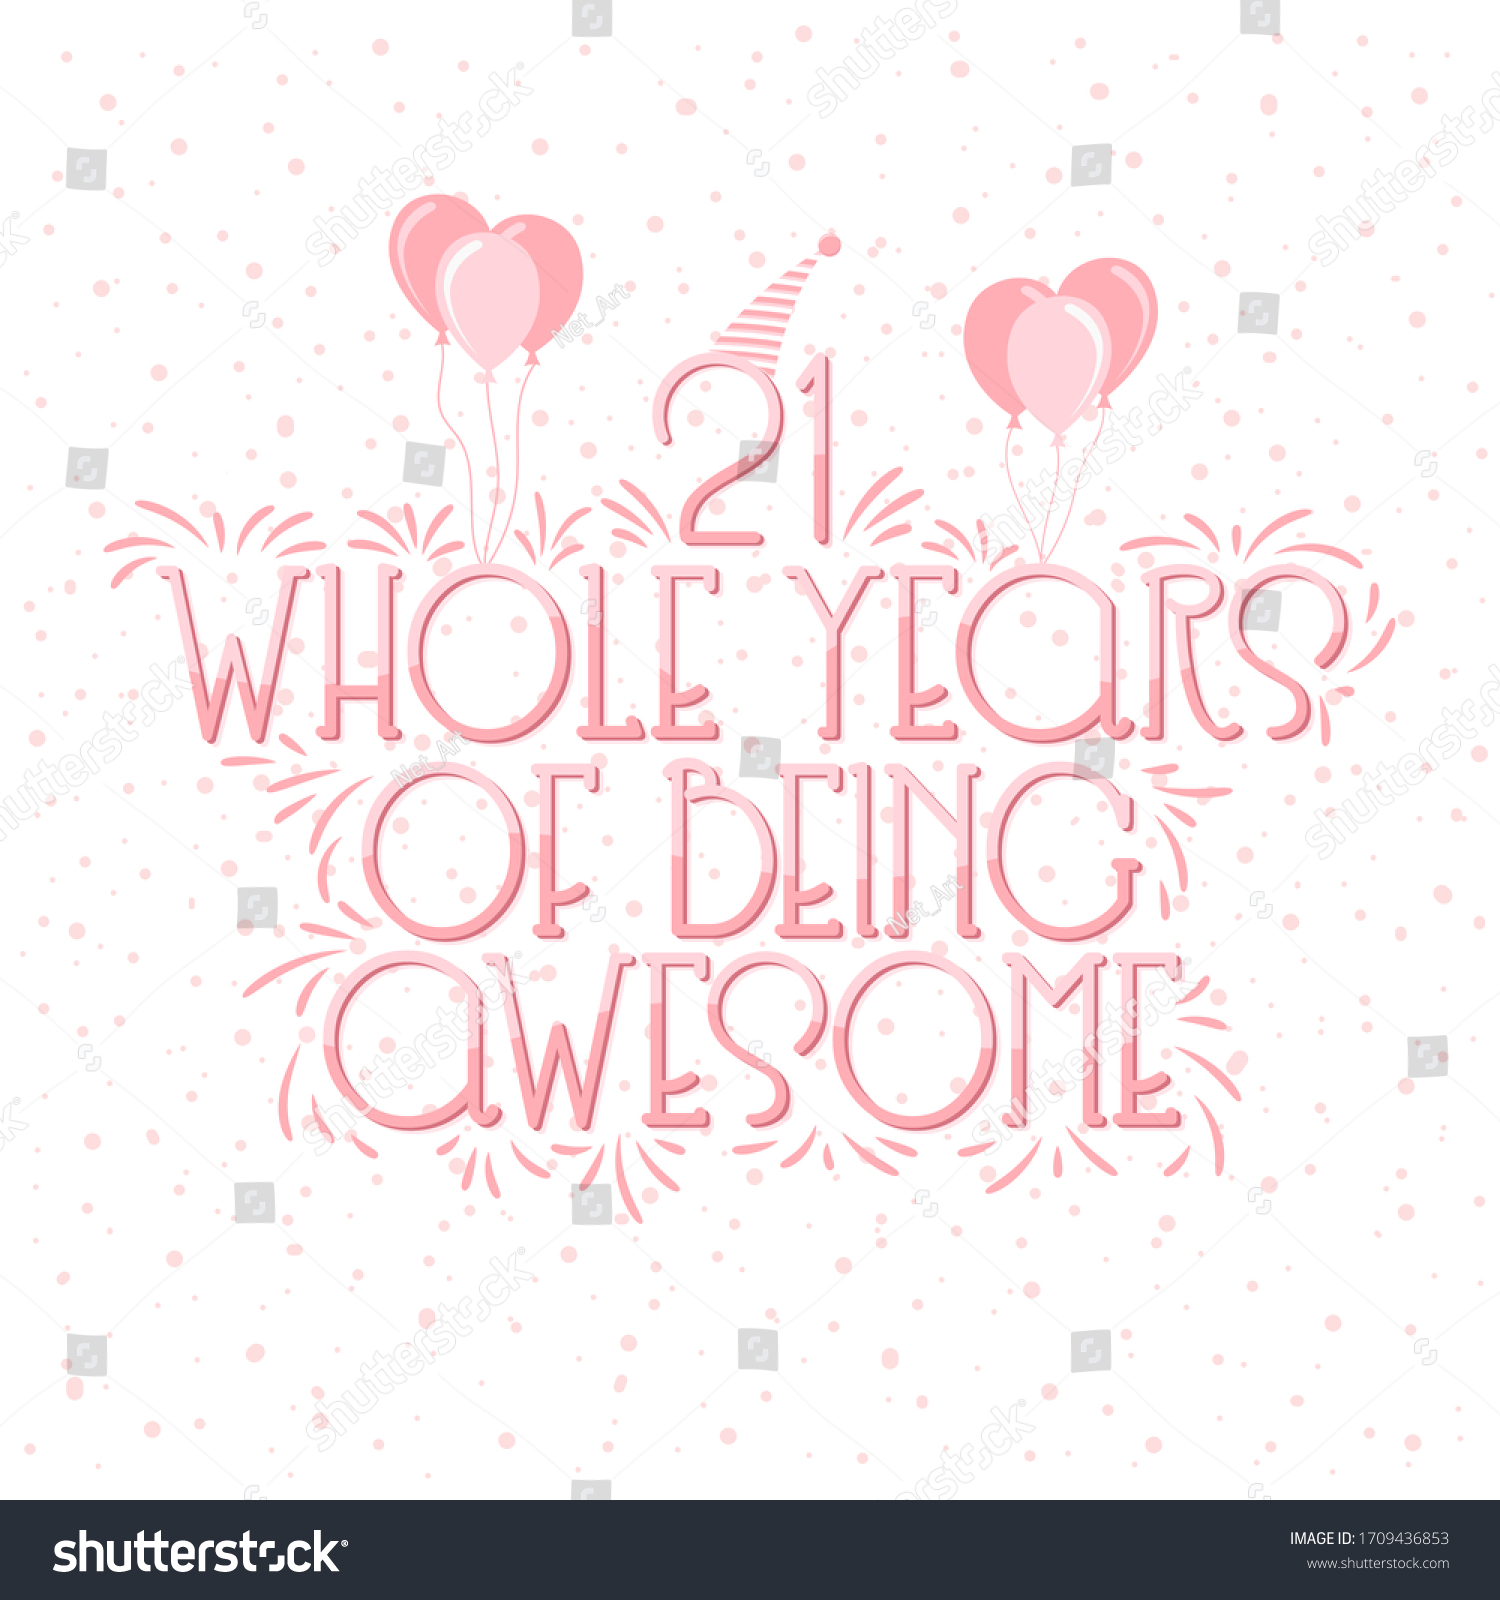 SVG of 21 years Birthday And 21 years Wedding Anniversary Typography Design, 21 Whole Years Of Being Awesome. svg